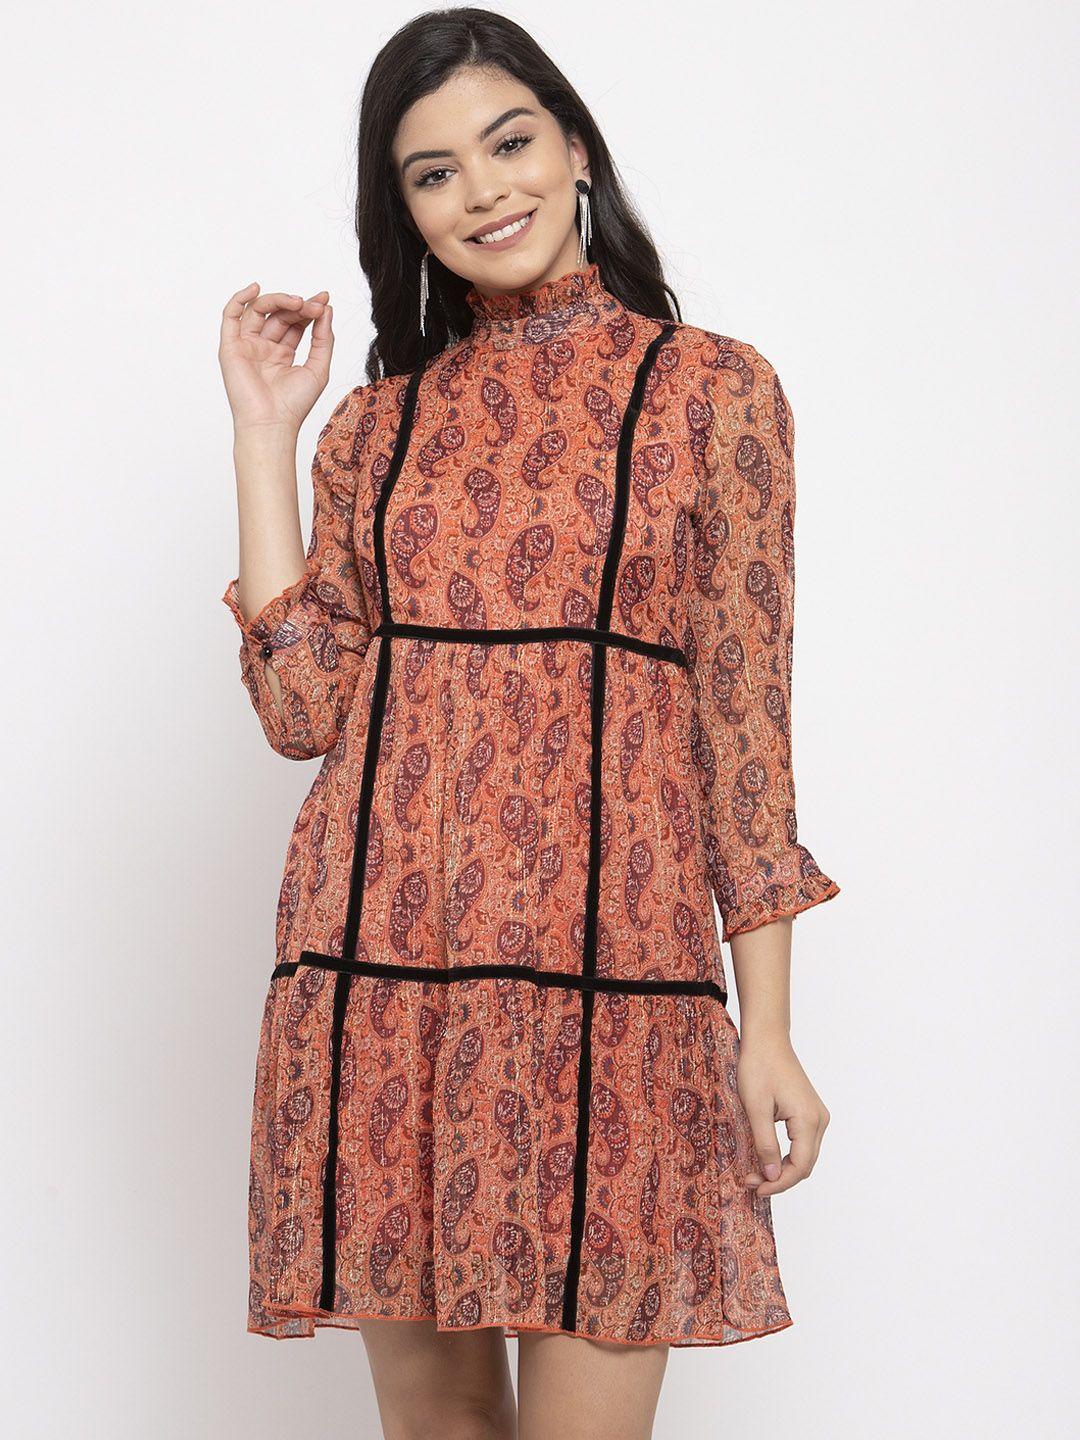 kassually women orange printed fit and flare dress